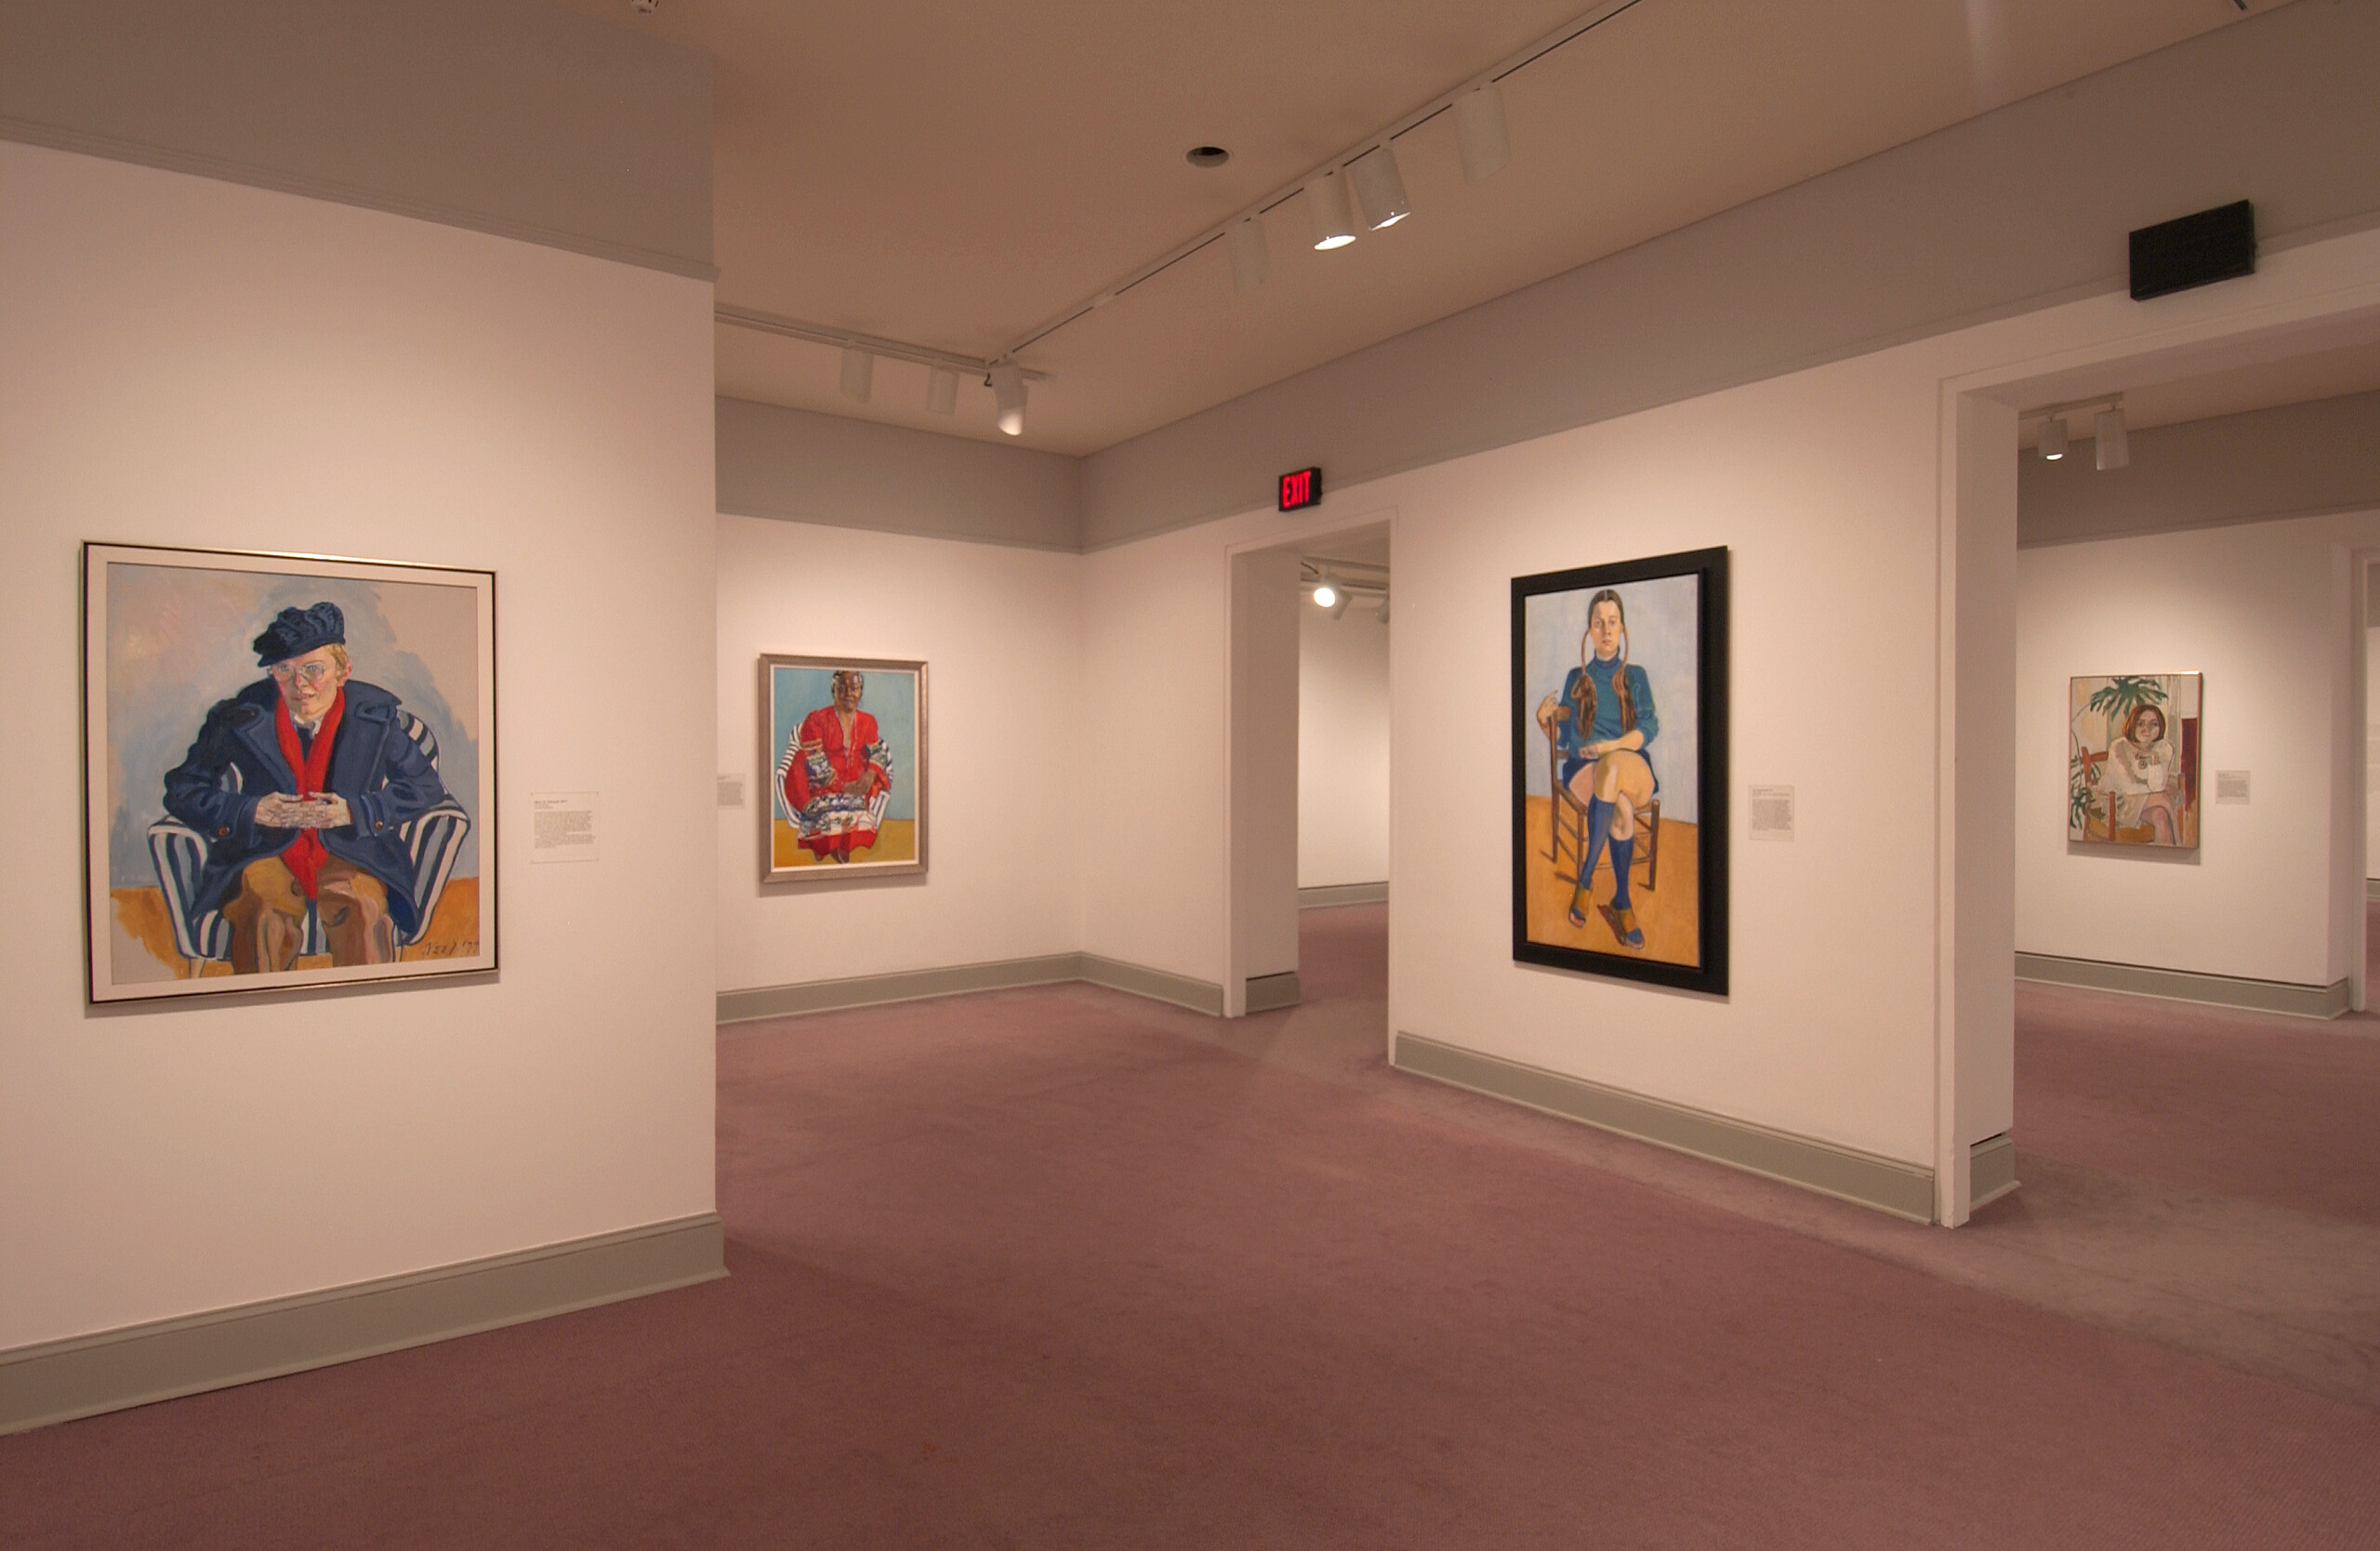 An installation view of a gallery space shows several paintings hanging on a white wall. The paintings are colorful and show different women sitting in a chair. The woman portrayed on the left has a light skin tone and wears a blue coat and a blue beret, the woman in the painting in the center of the photograph has a medium-dark skin tone and wears a red dress, and the woman on the right painting has a light skin tone and pigtails.